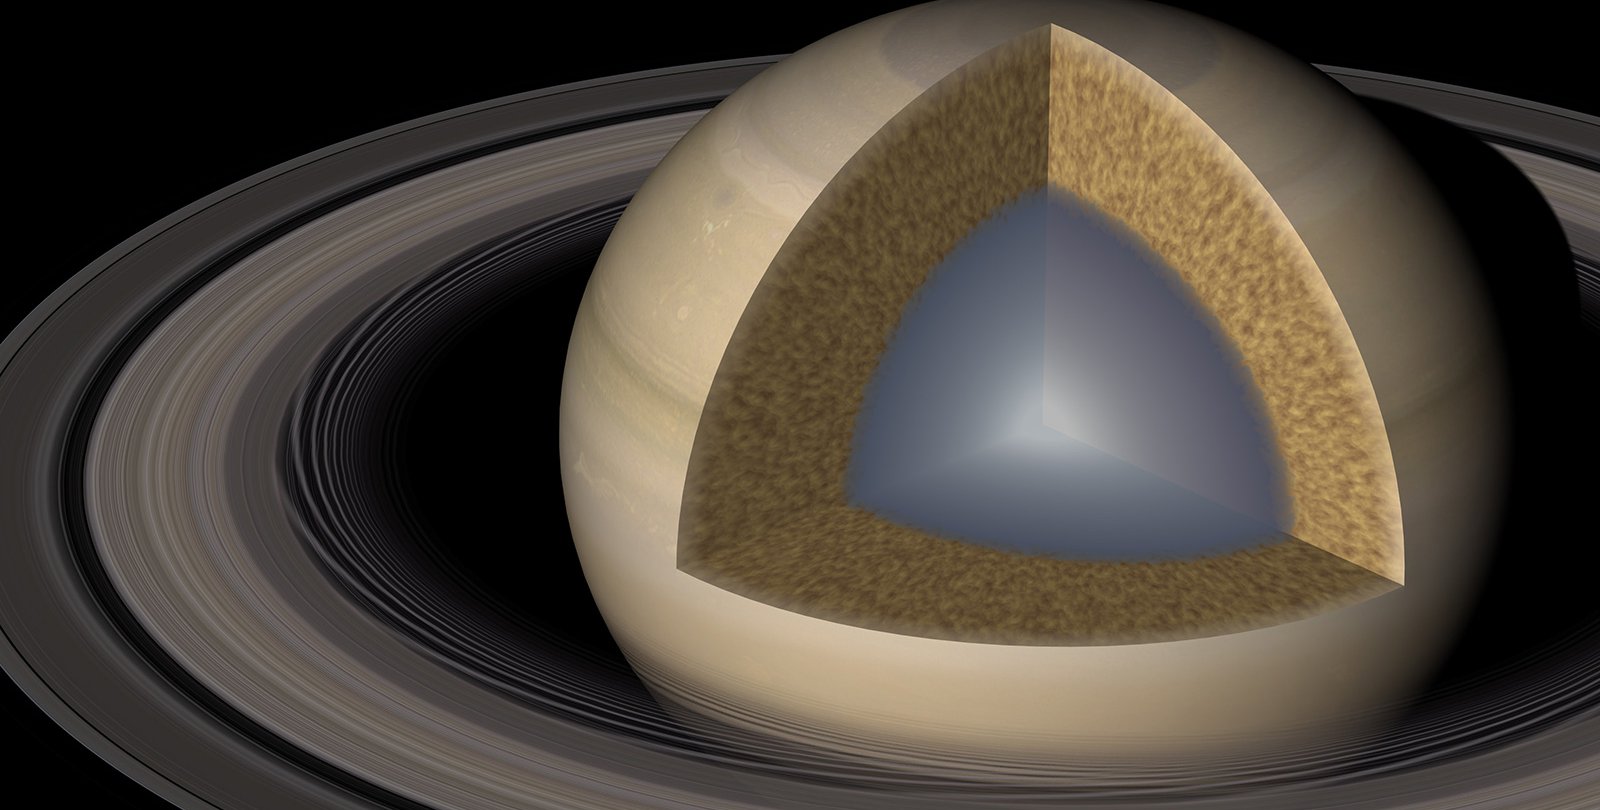 Saturn has a slushy core and rings that wiggle